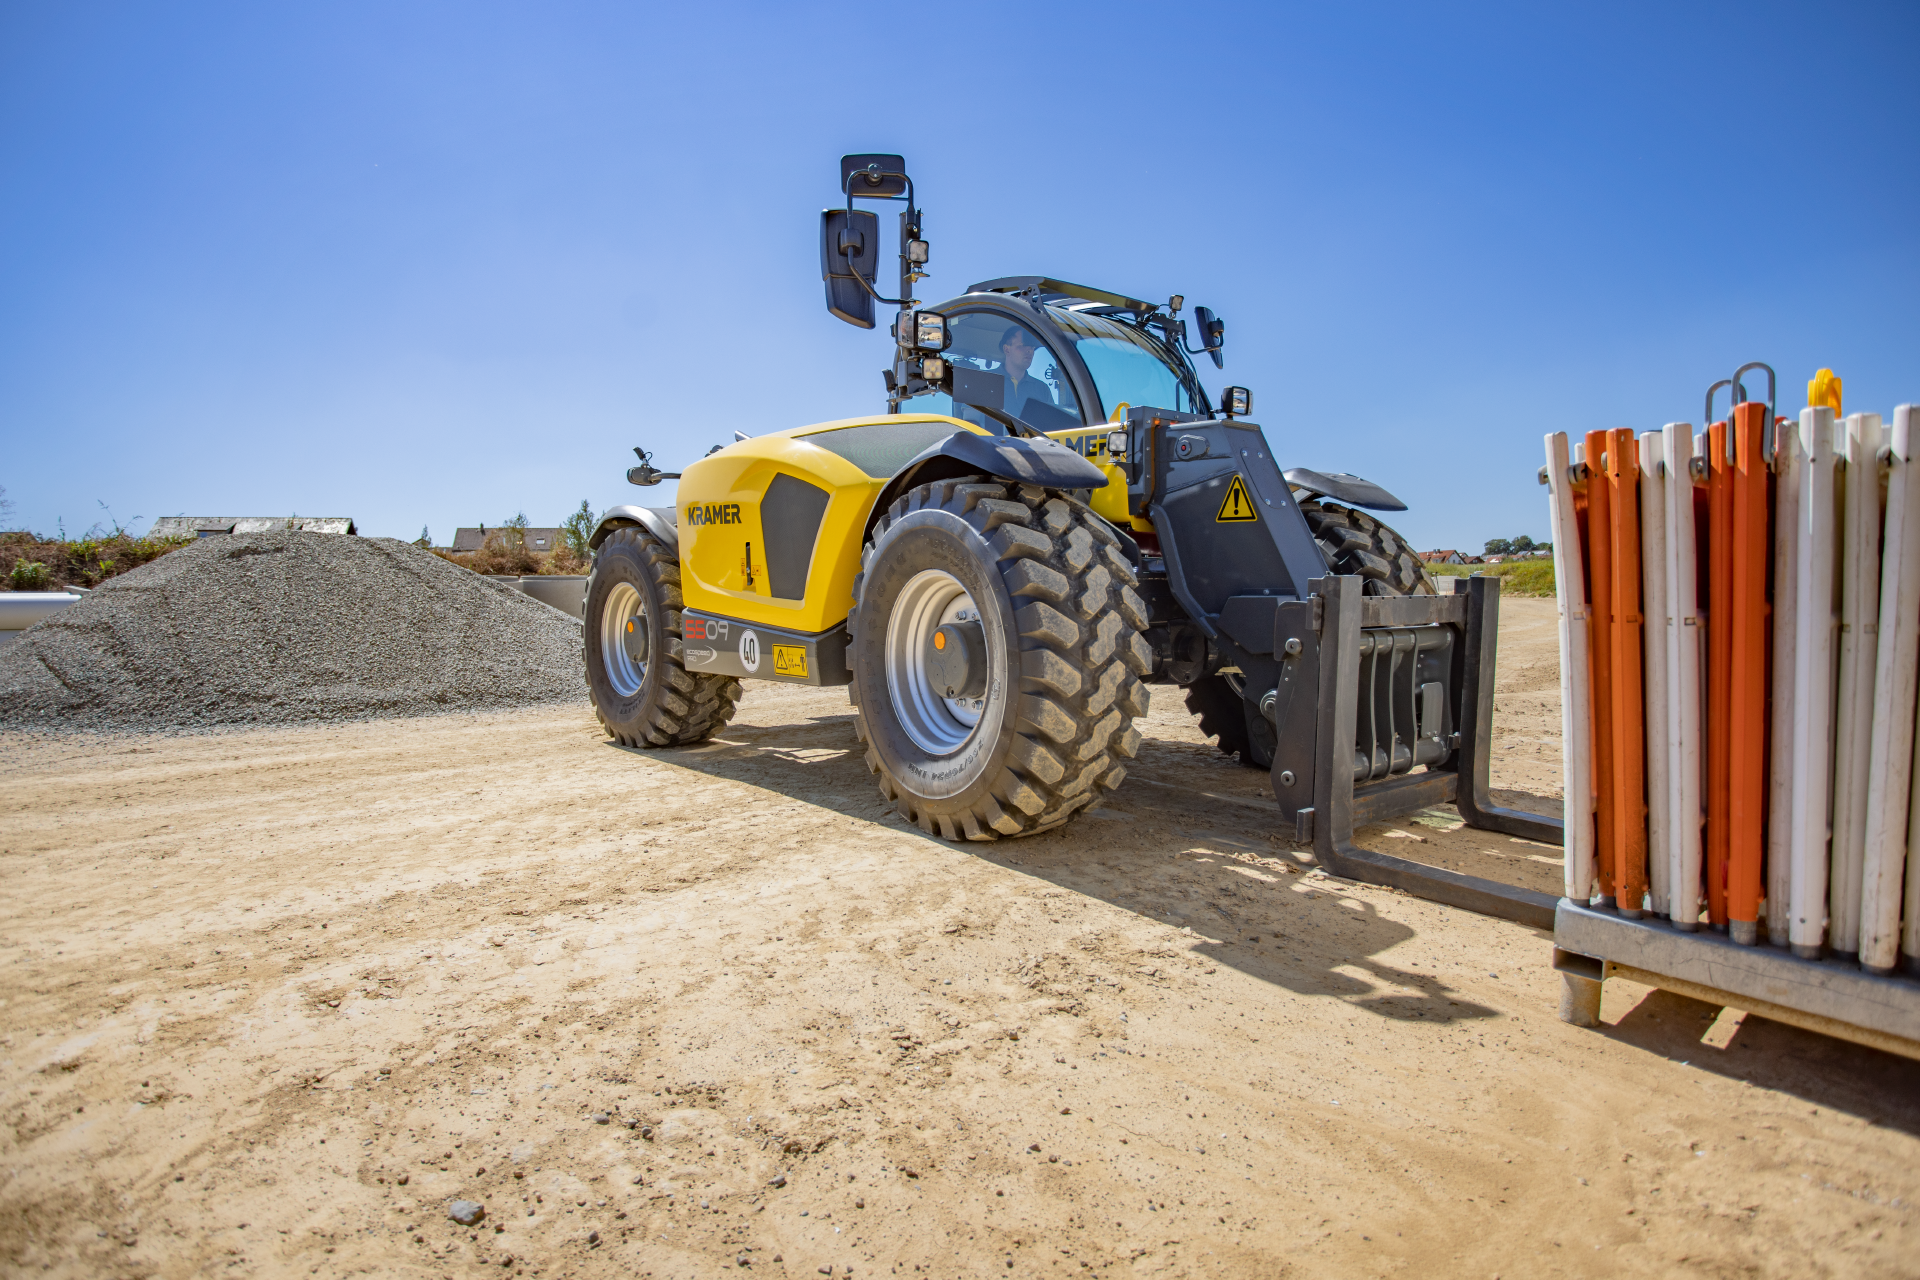 The Kramer telehandler 5509 while working on a construction site.